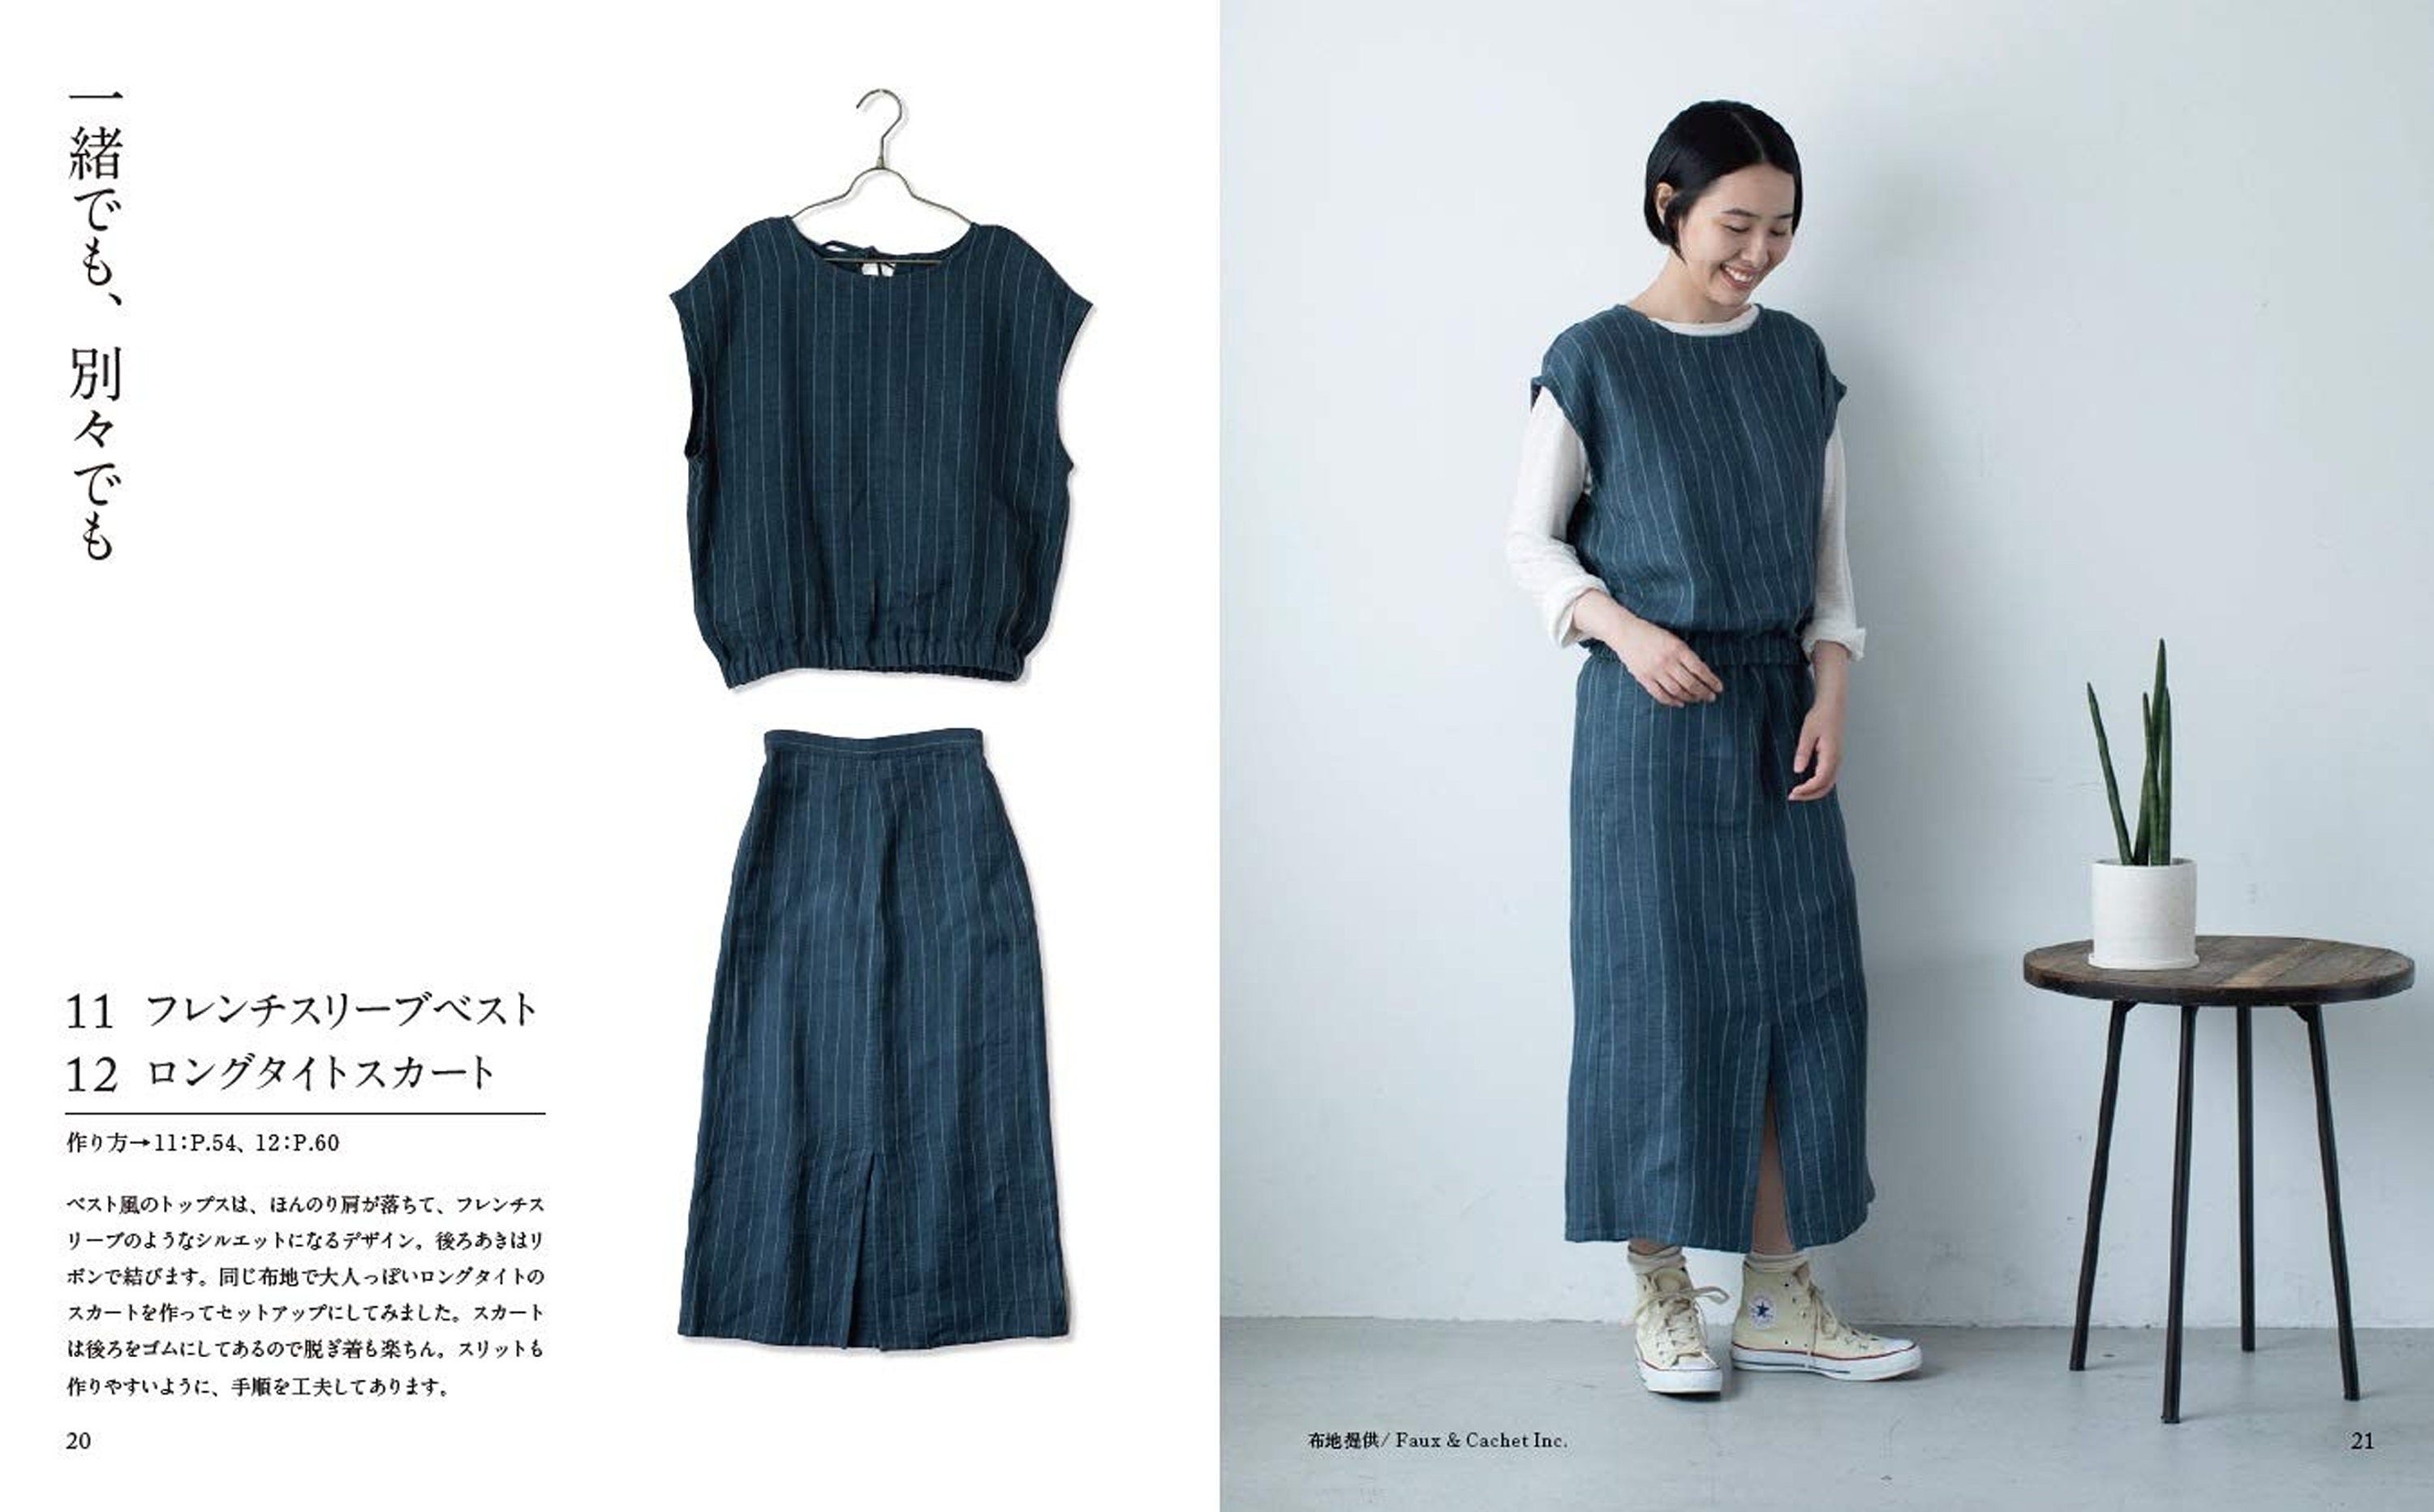 May Me Style Simple Wardrobe Japanese Sewing Pattern Book - Etsy